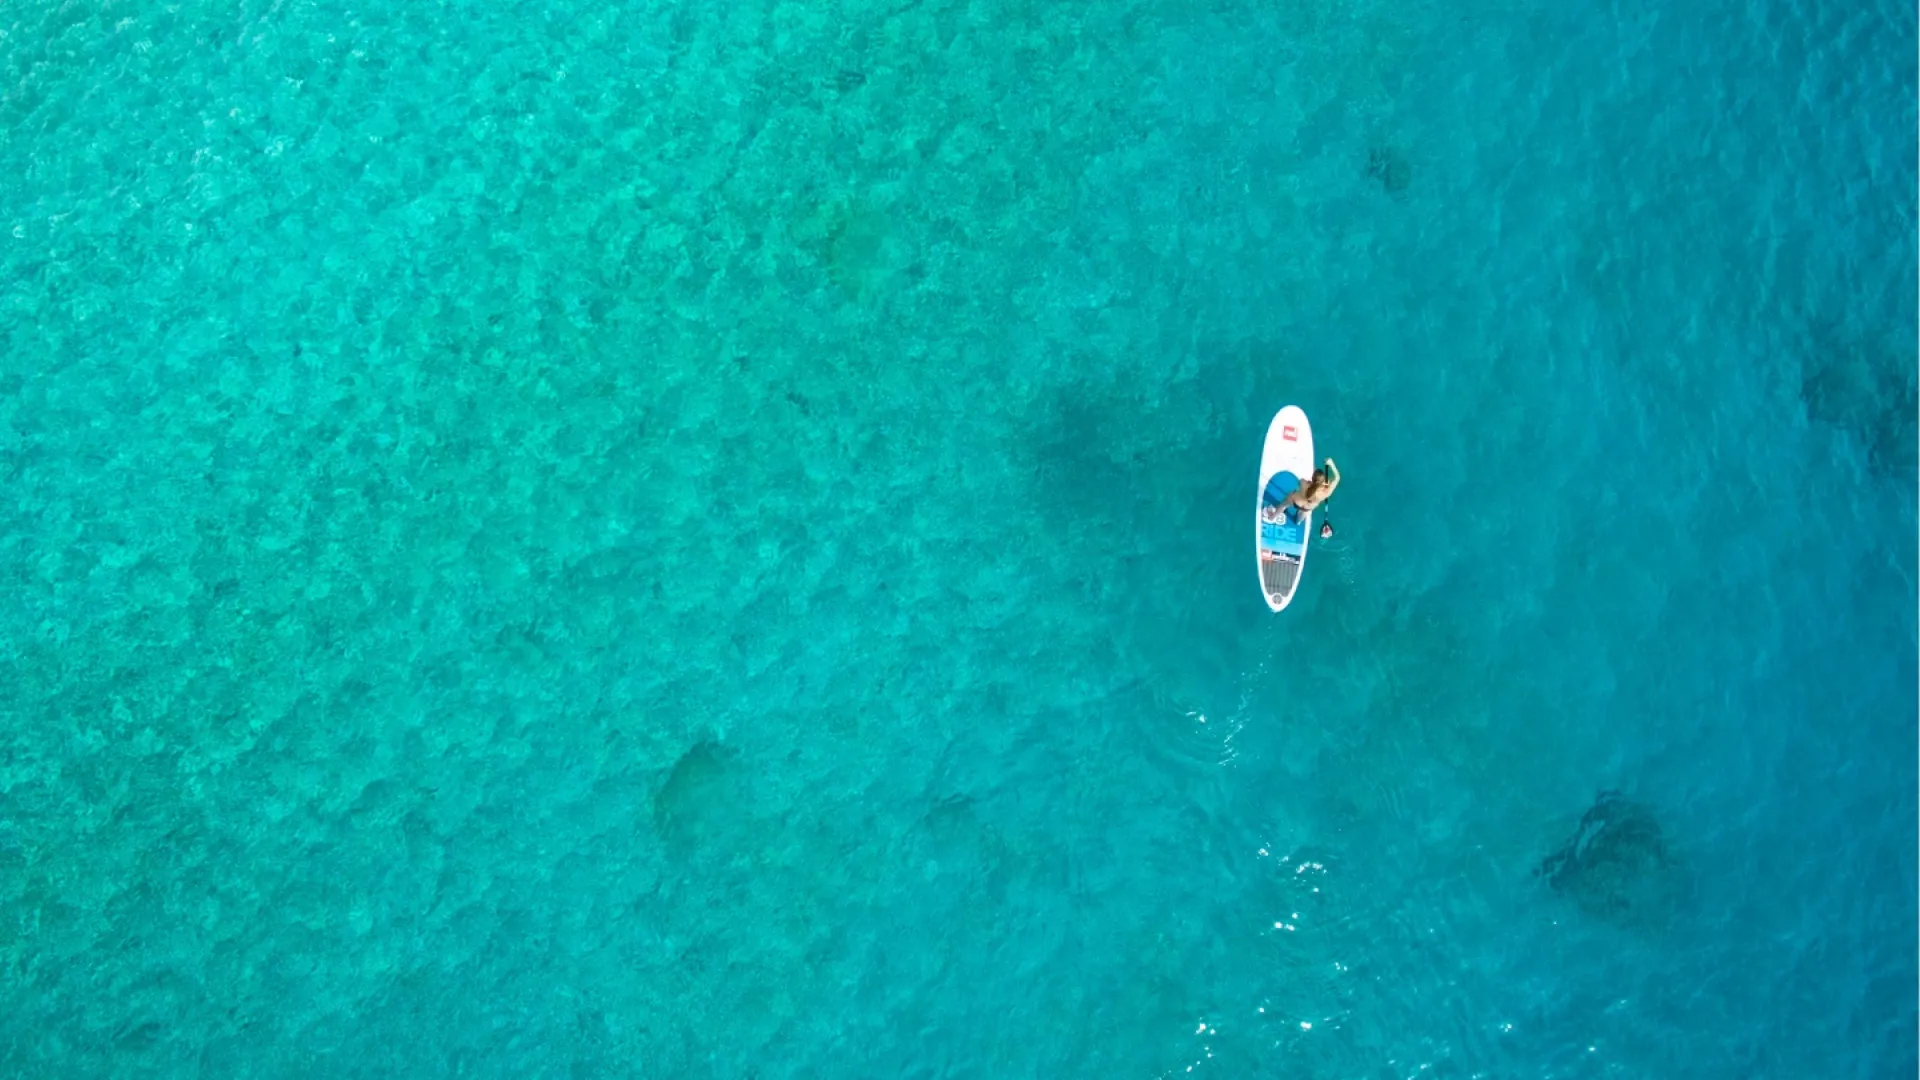 Bird's eye of person paddle boarding